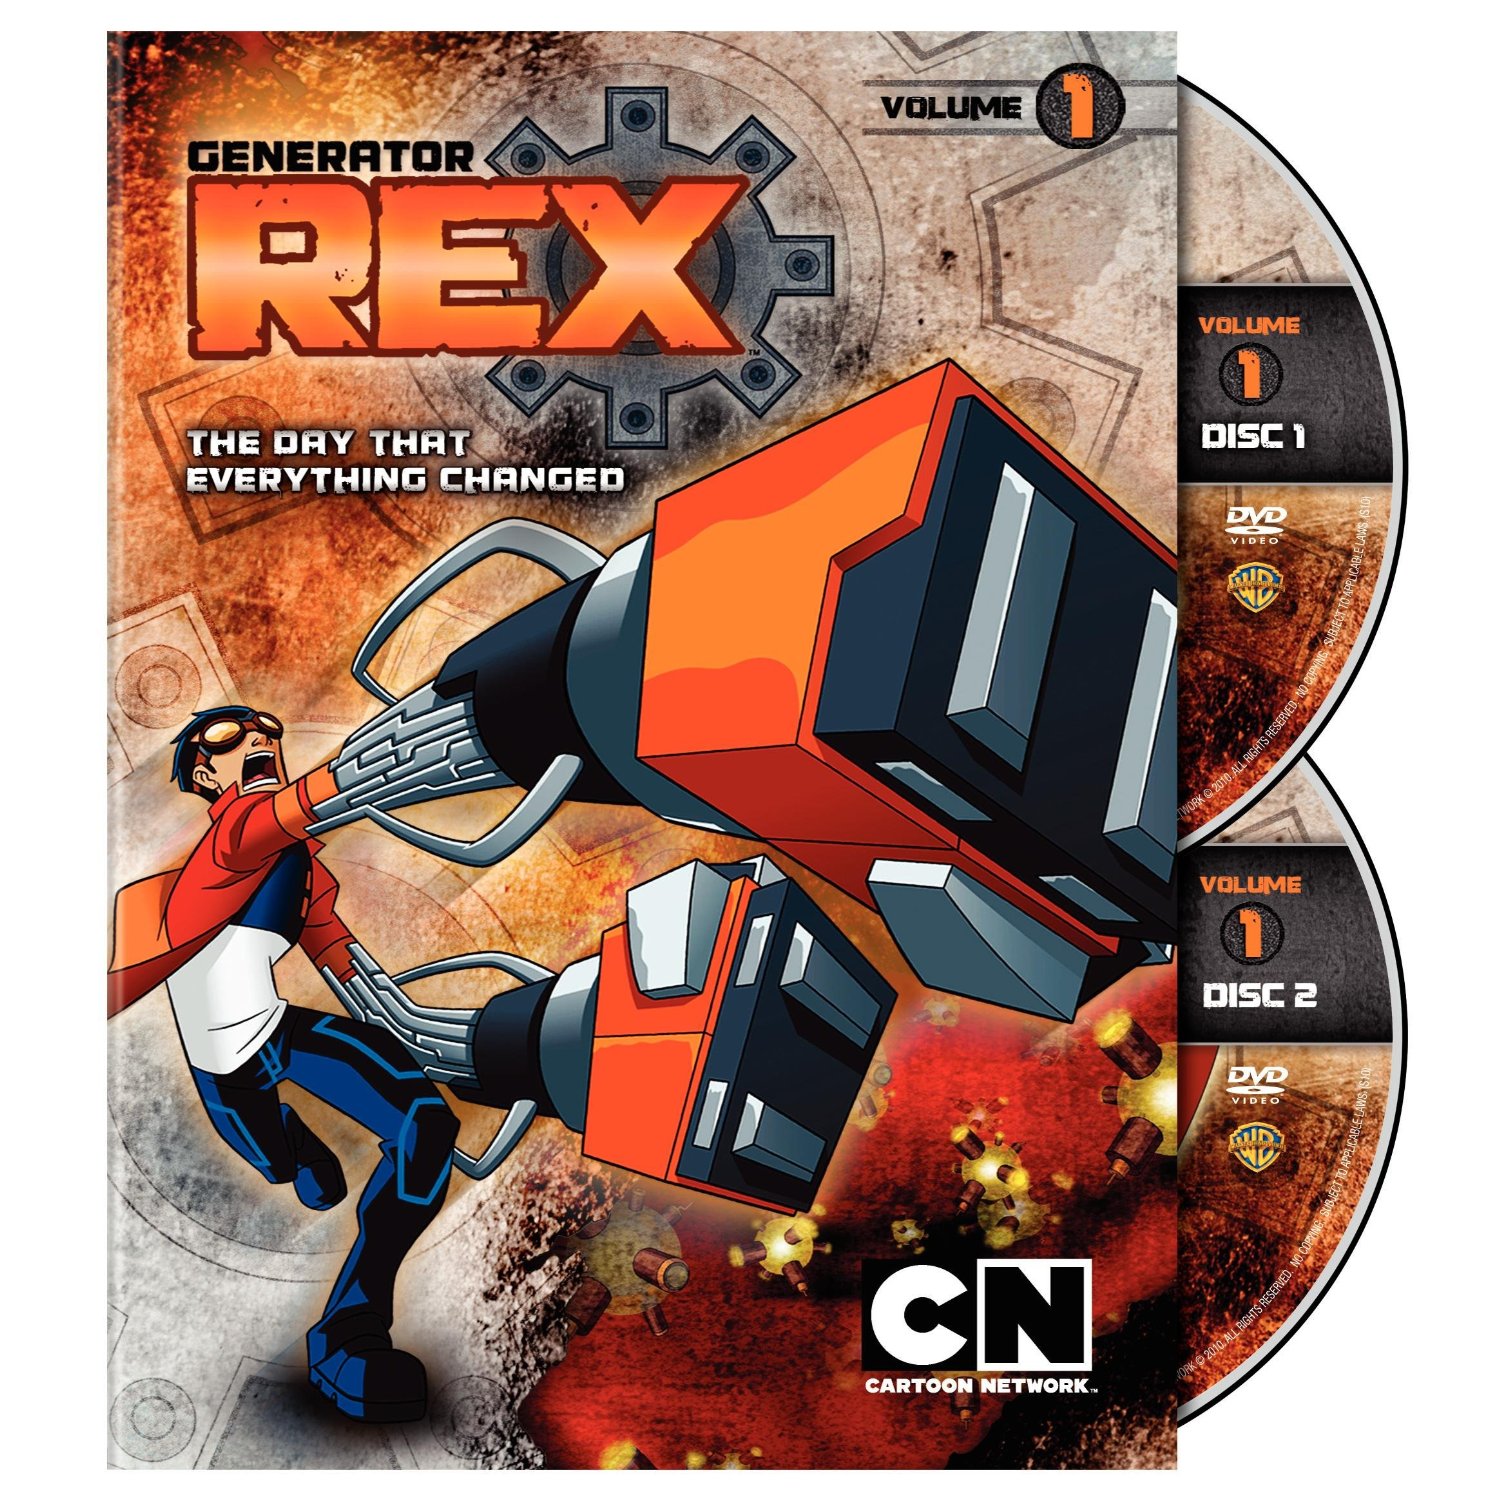 GENERATOR REX: Storyboard Artist for this 2D-Animated TV Series for Cartoon Network